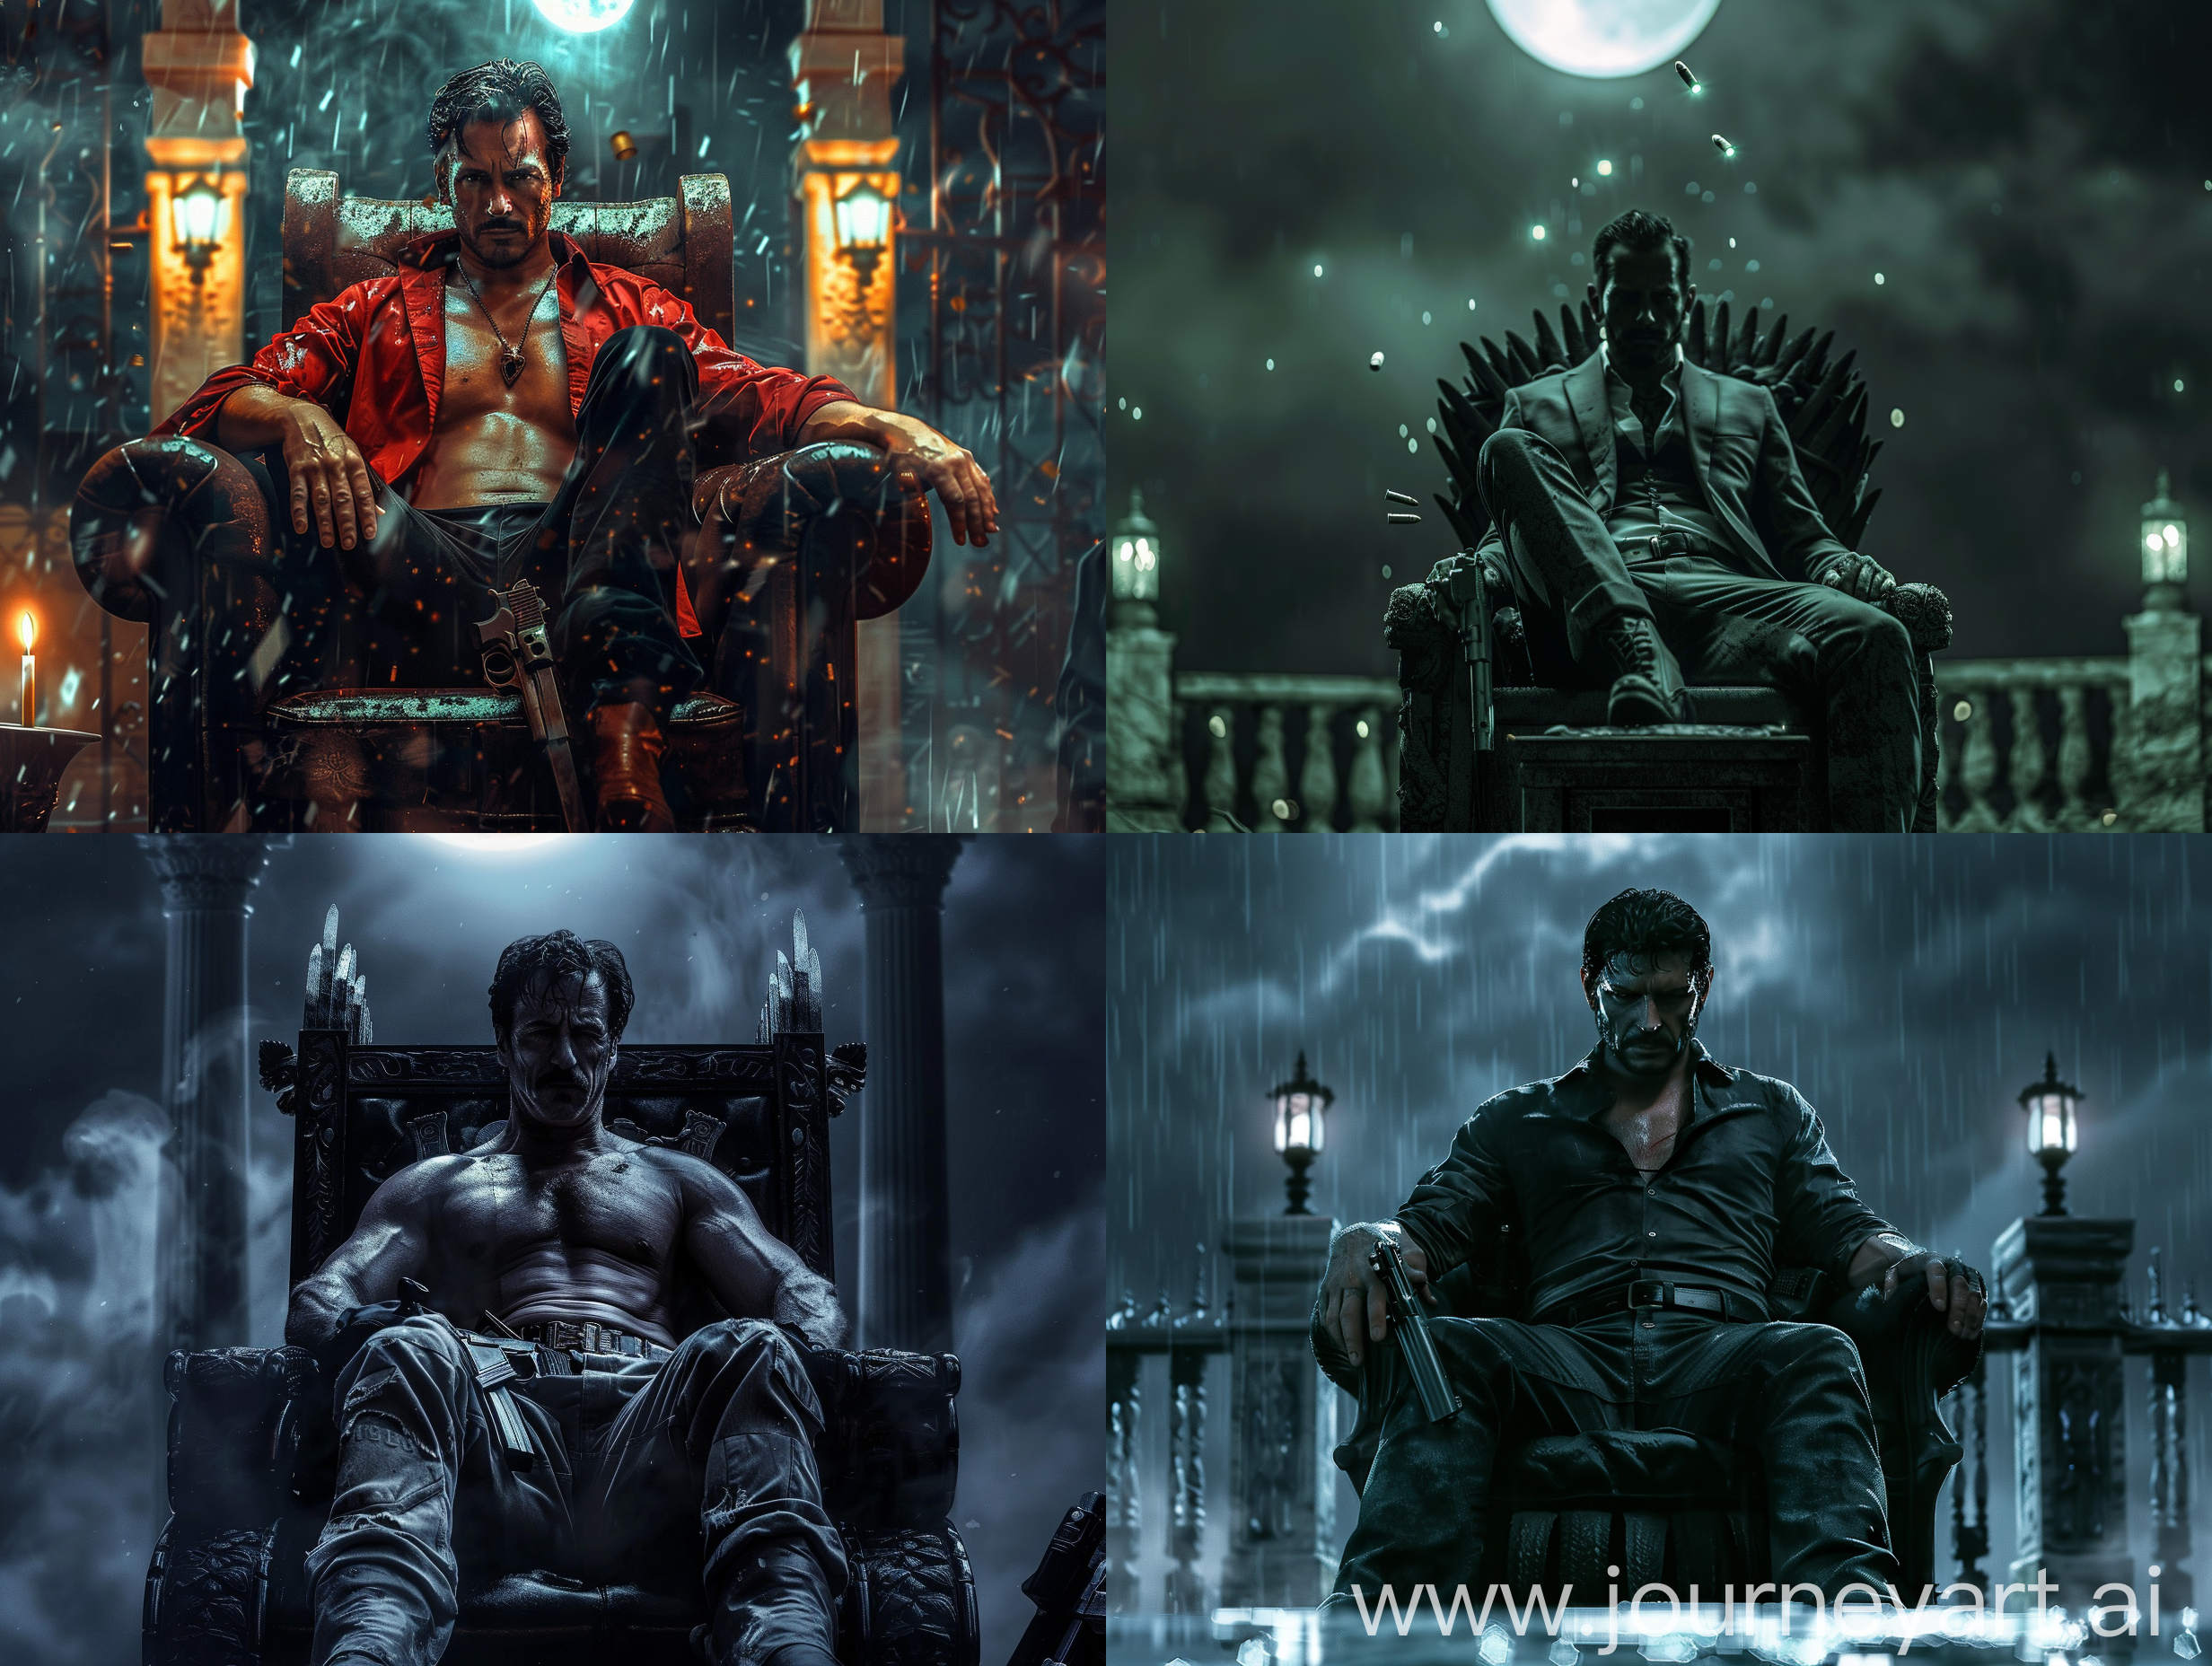 Antonio montana sitting on a throne with a gun near his legs with no bullets inside, the backround is dark he may have killed 200 people, he seems tired, outside is night and there is the dark moon lights, hd, cinematic